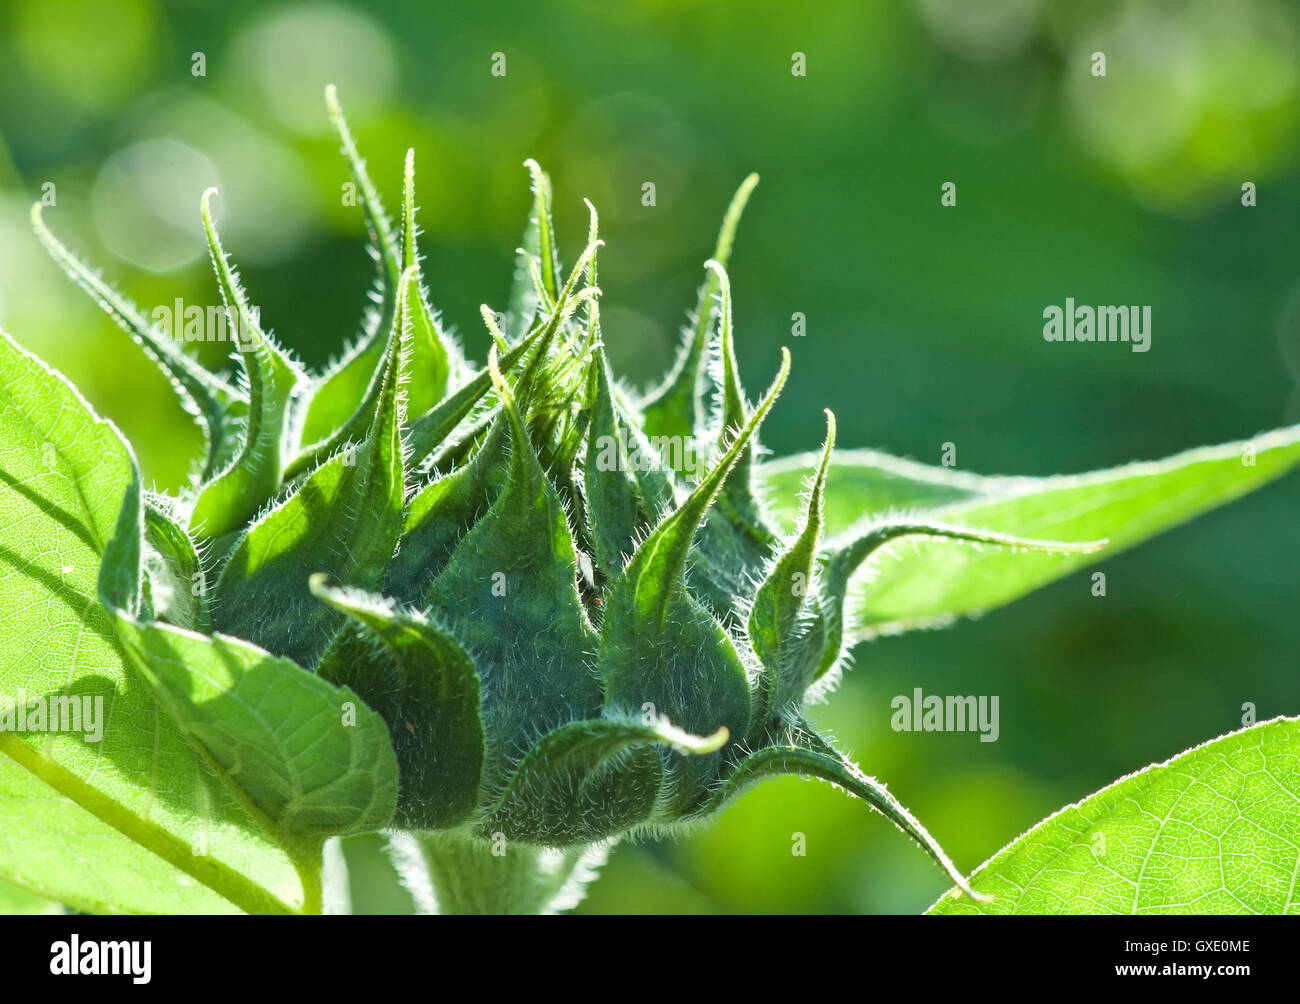 Natural environmental image. Green closed sunflower bud alight by sunlight close up with green background of other plats. Stock Photo